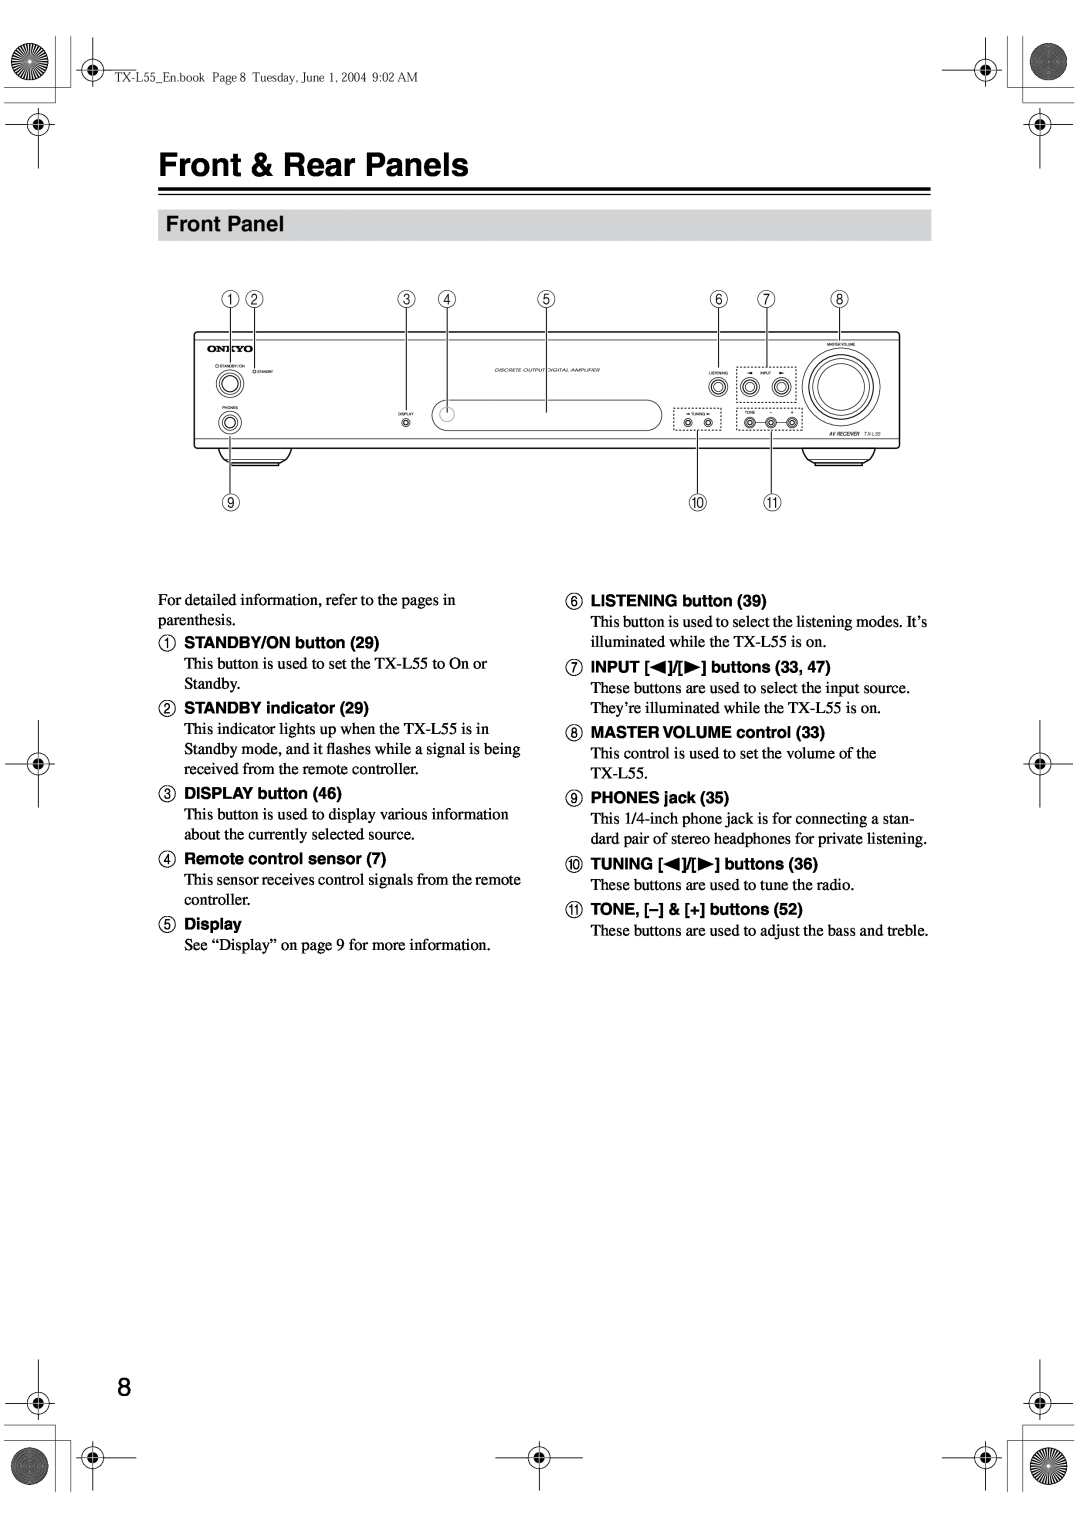 Onkyo TX-L55 instruction manual Front & Rear Panels, Front Panel 